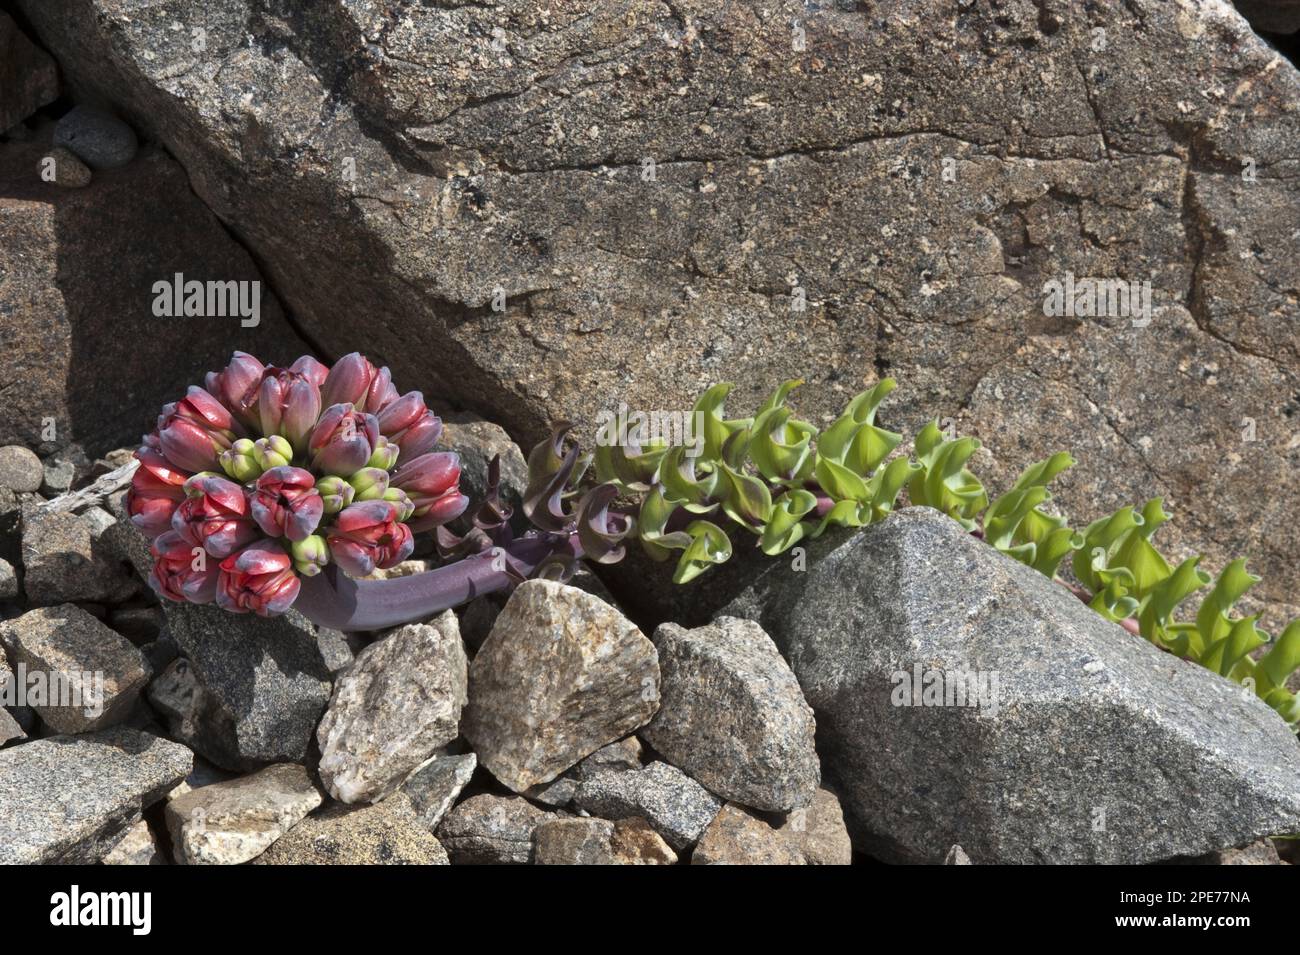 Lion's claw (Leontochir ovallei) opens flower buds, grows in the valley, near Totaral, Atacama Desert, Chile Stock Photo